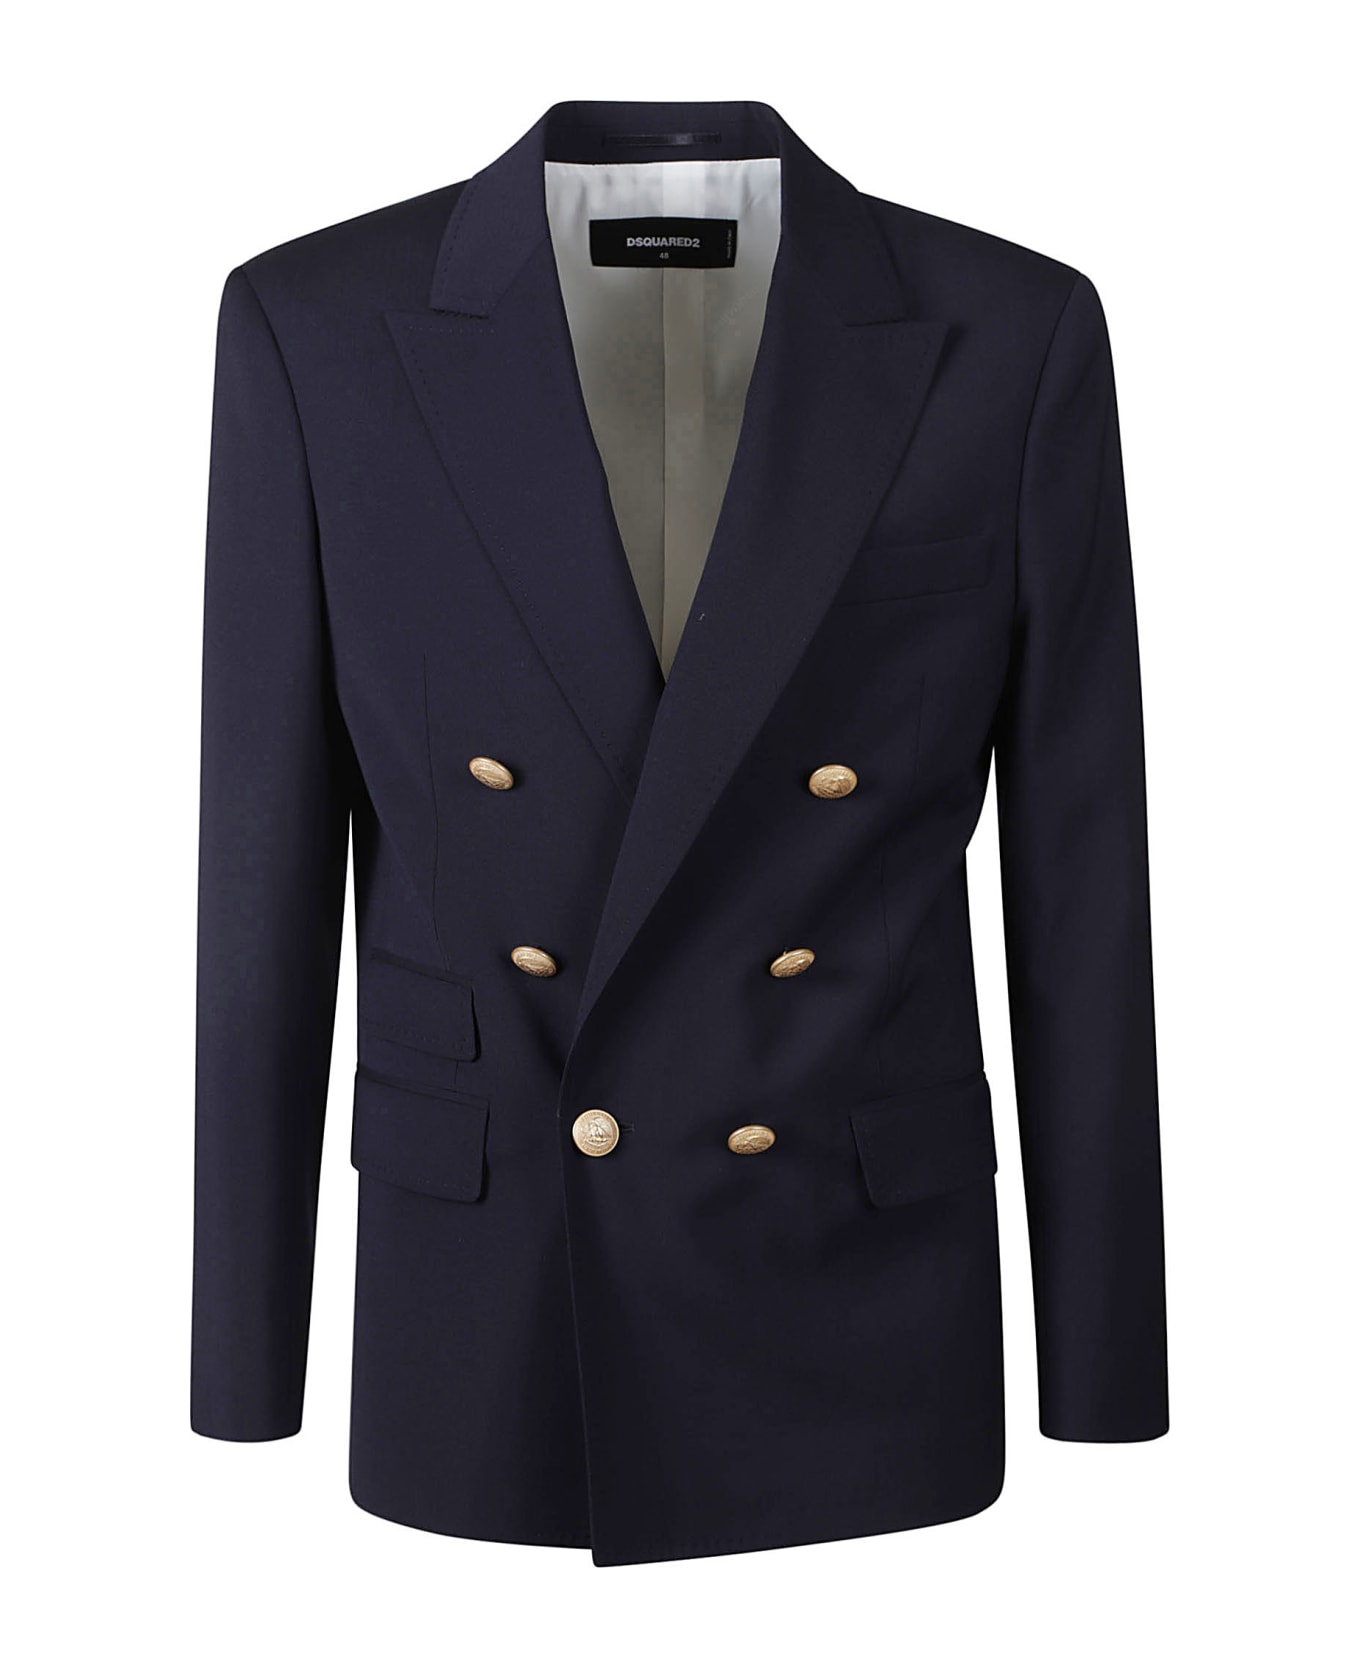 Dsquared2 Palm Beach Double Breasted Blazer - Navy Blue ブレザー